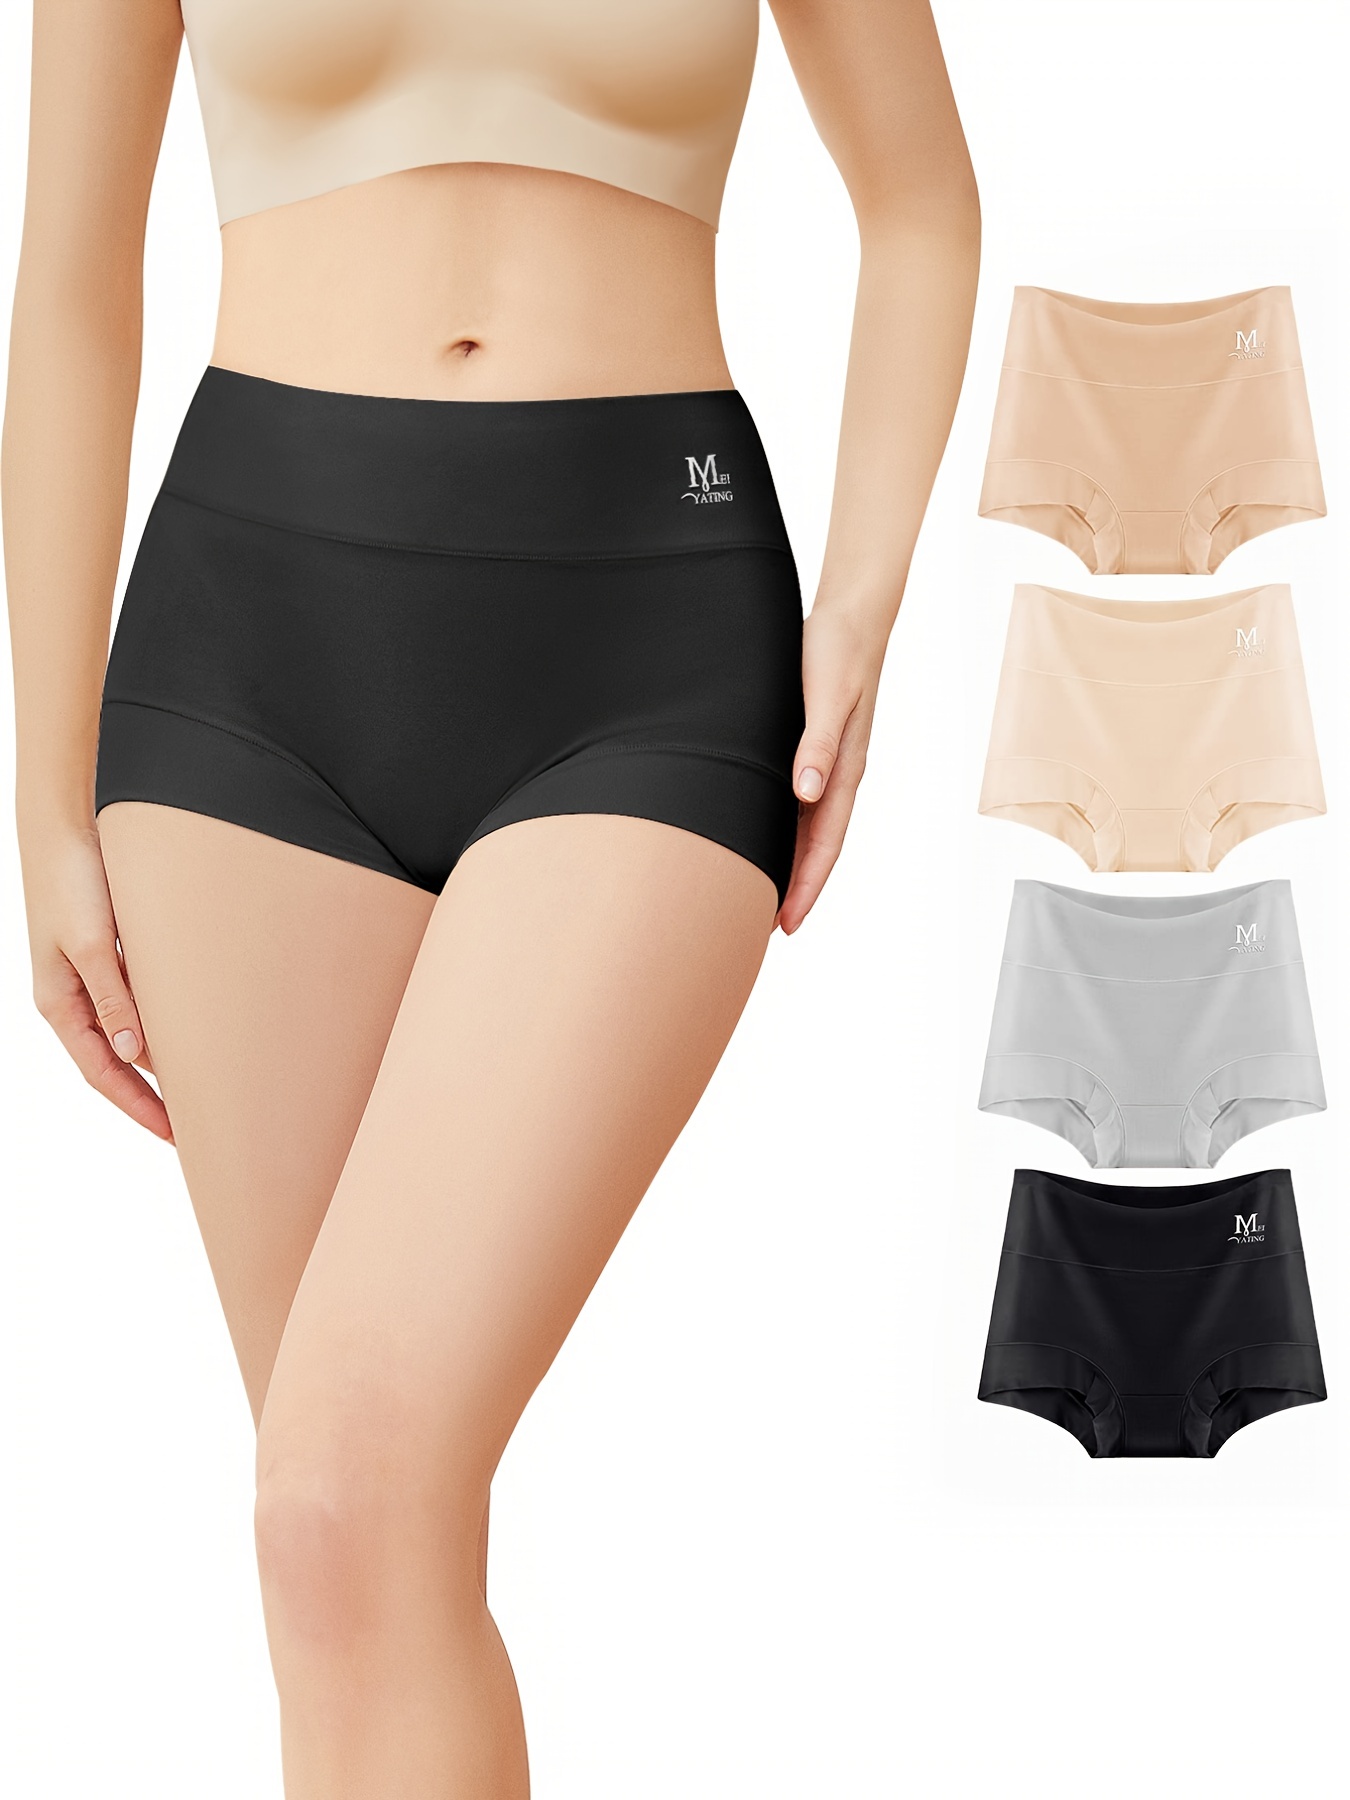 Women Boyshorts. Comfortable and Most Recommended-France